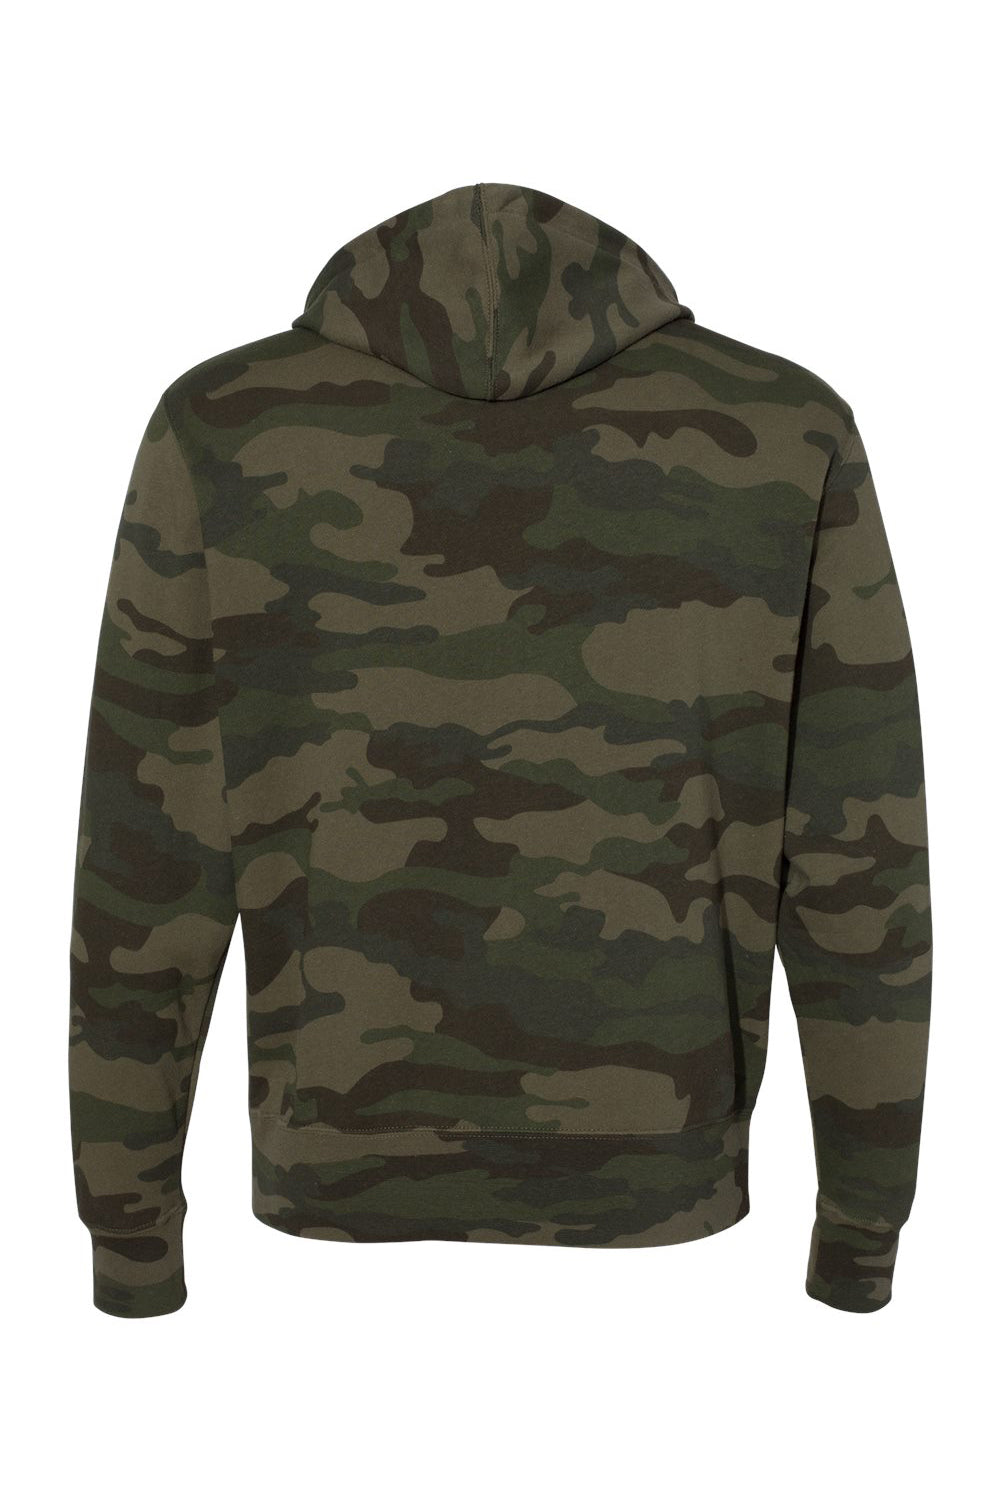 Independent Trading Co. AFX90UNZ Mens Full Zip Hooded Sweatshirt Hoodie Forest Green Camo Flat Back